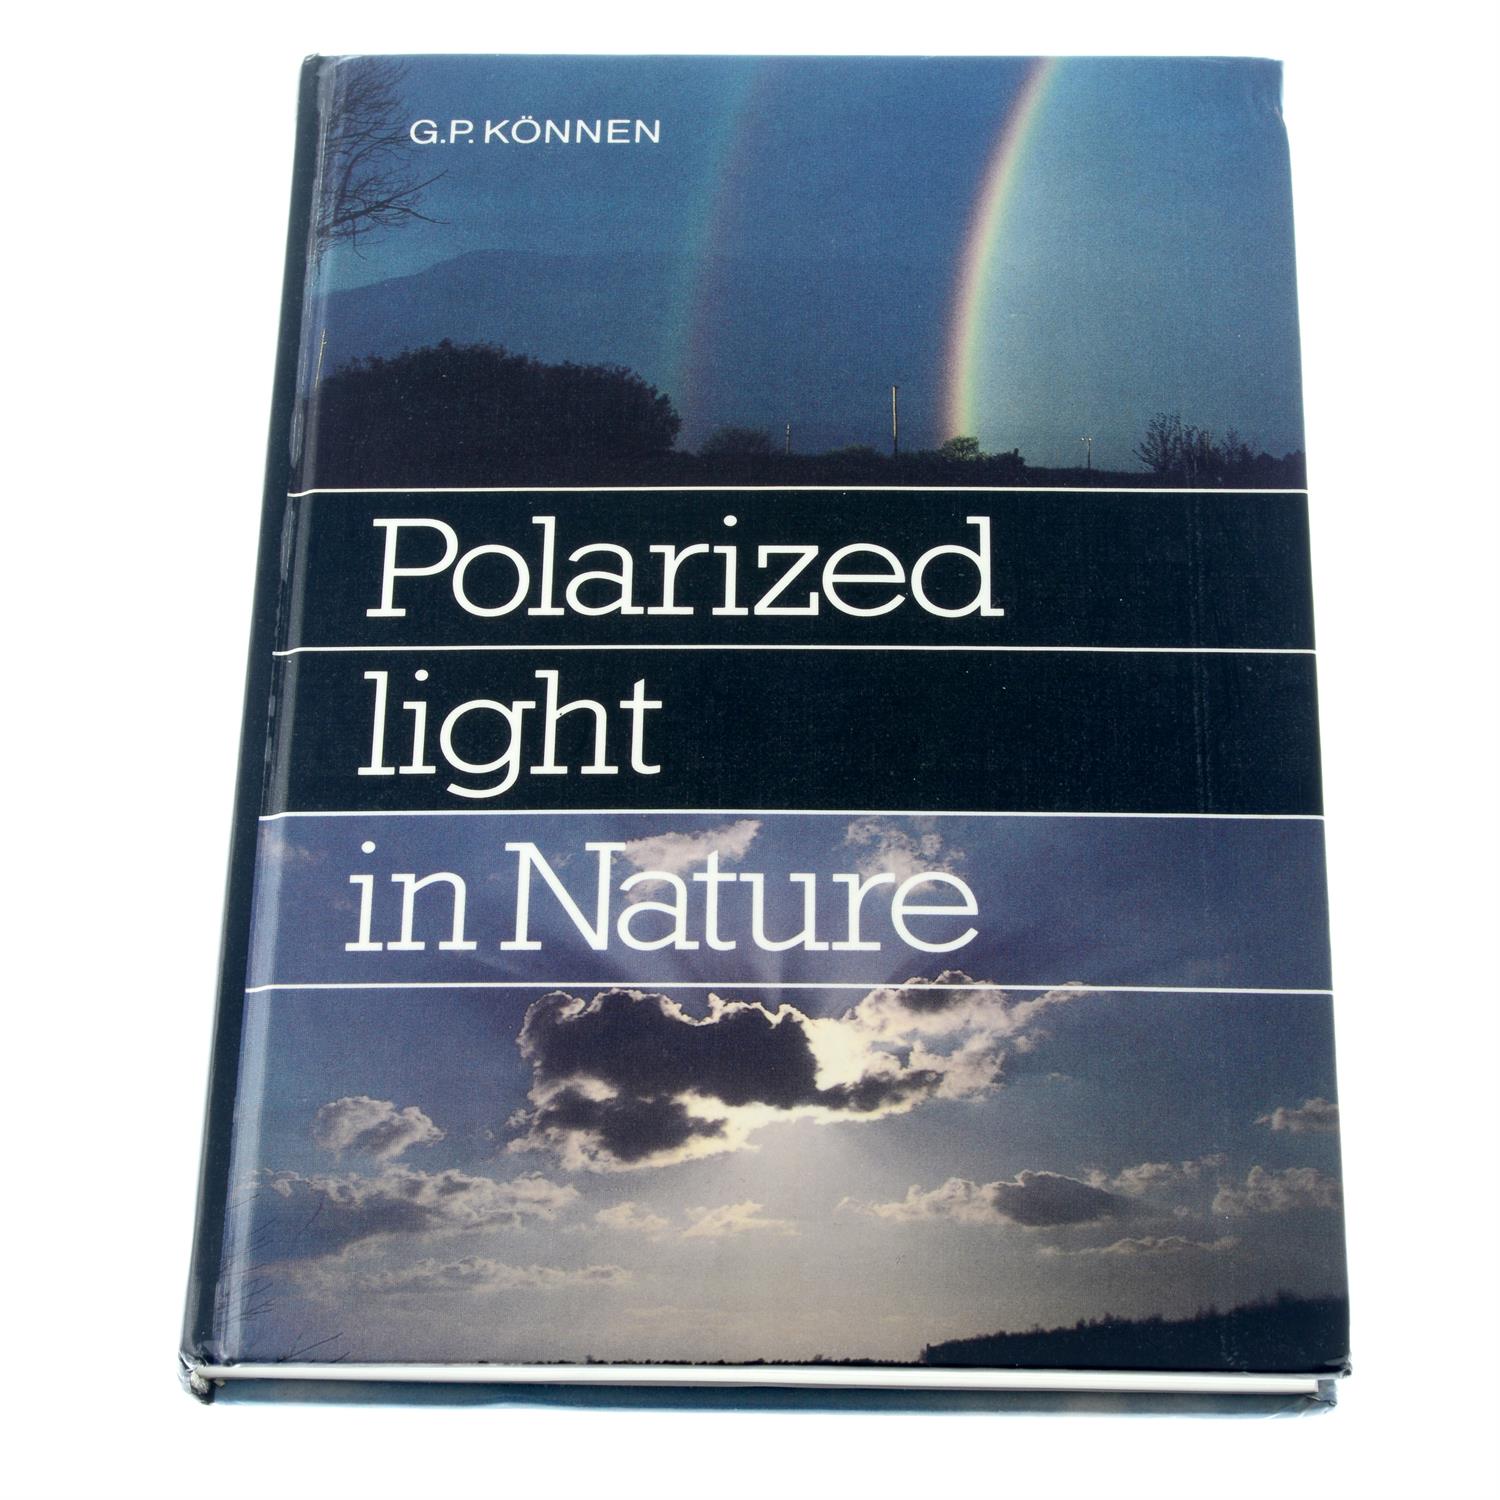 Book: 'Polarized light in nature' by G. P. Konnen